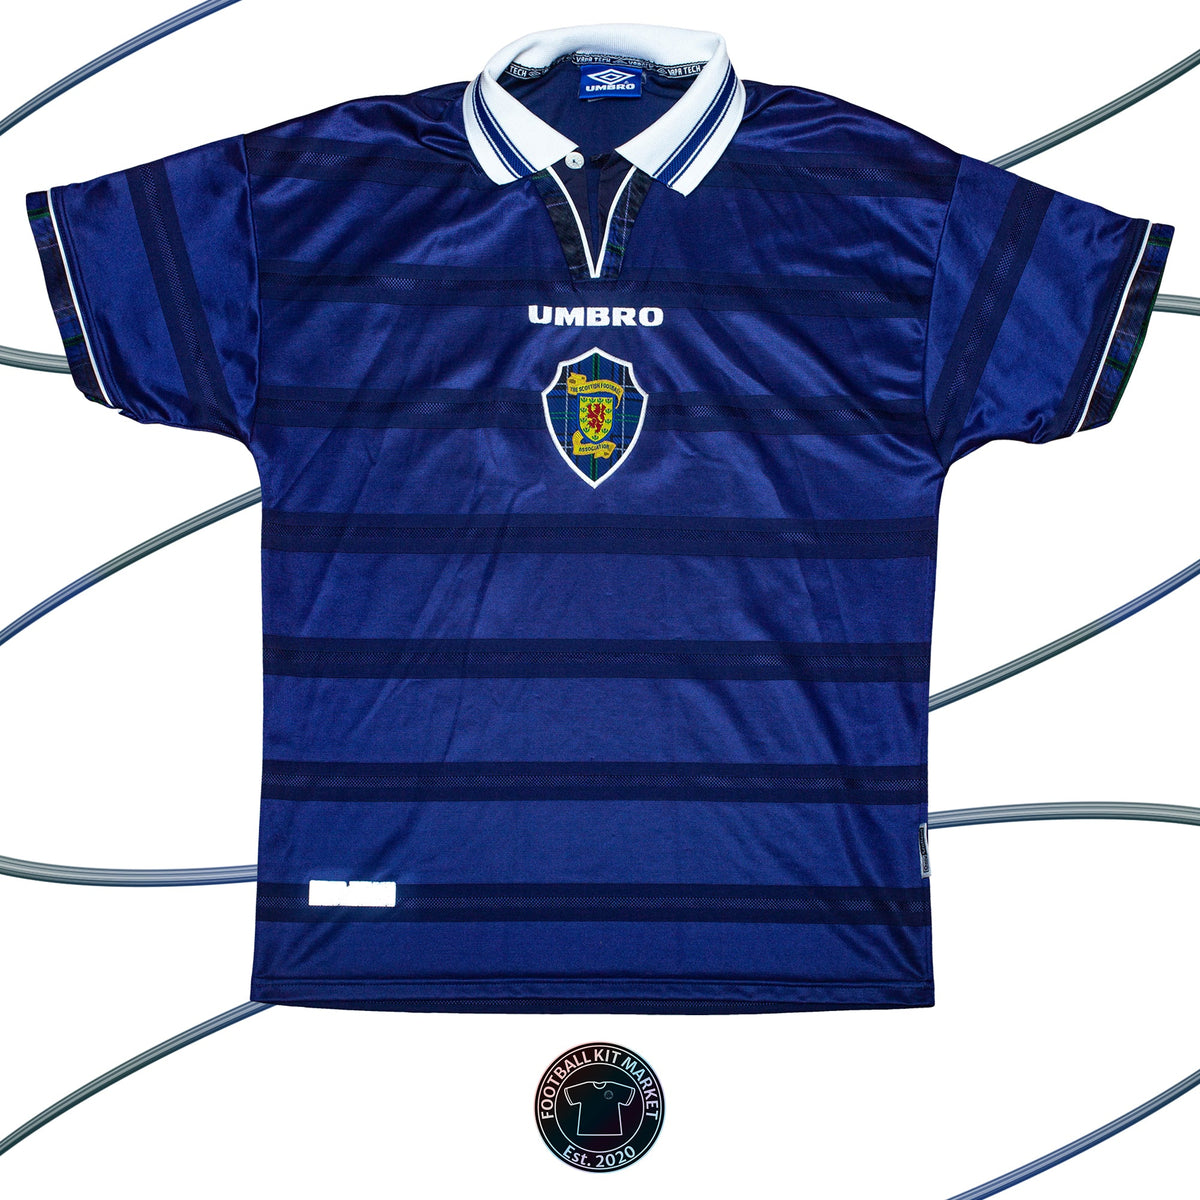 Genuine SCOTLAND Home (1998-2000) - UMBRO (L) - Product Image from Football Kit Market